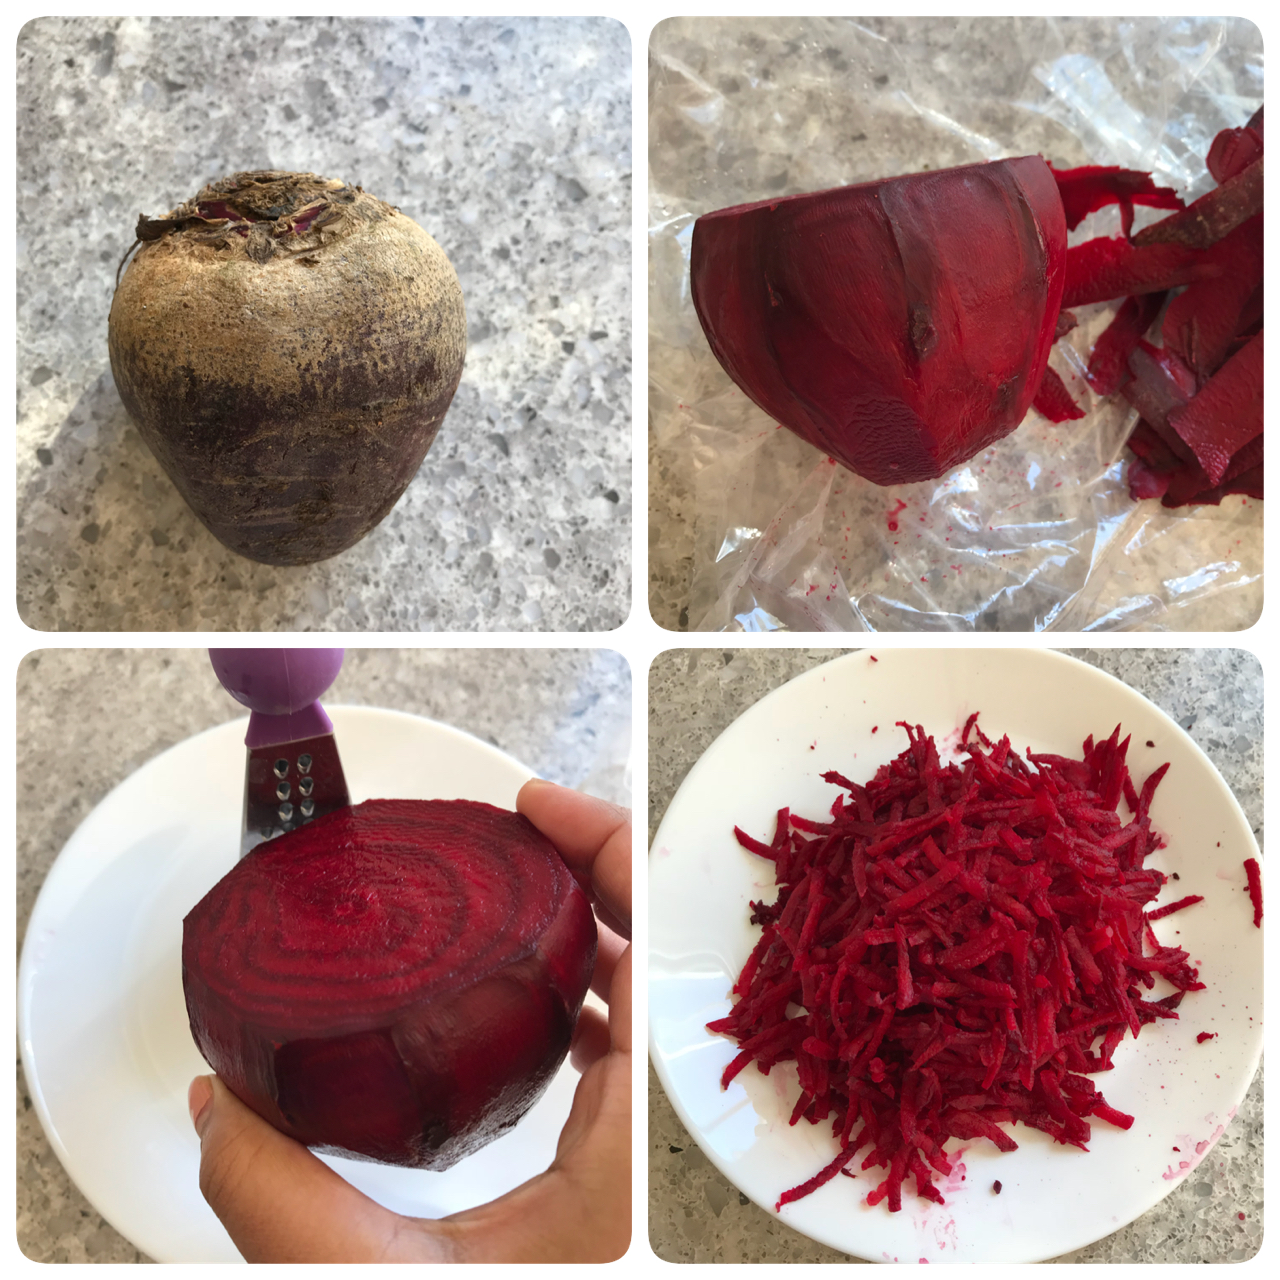 wash, peel and grate beetroot